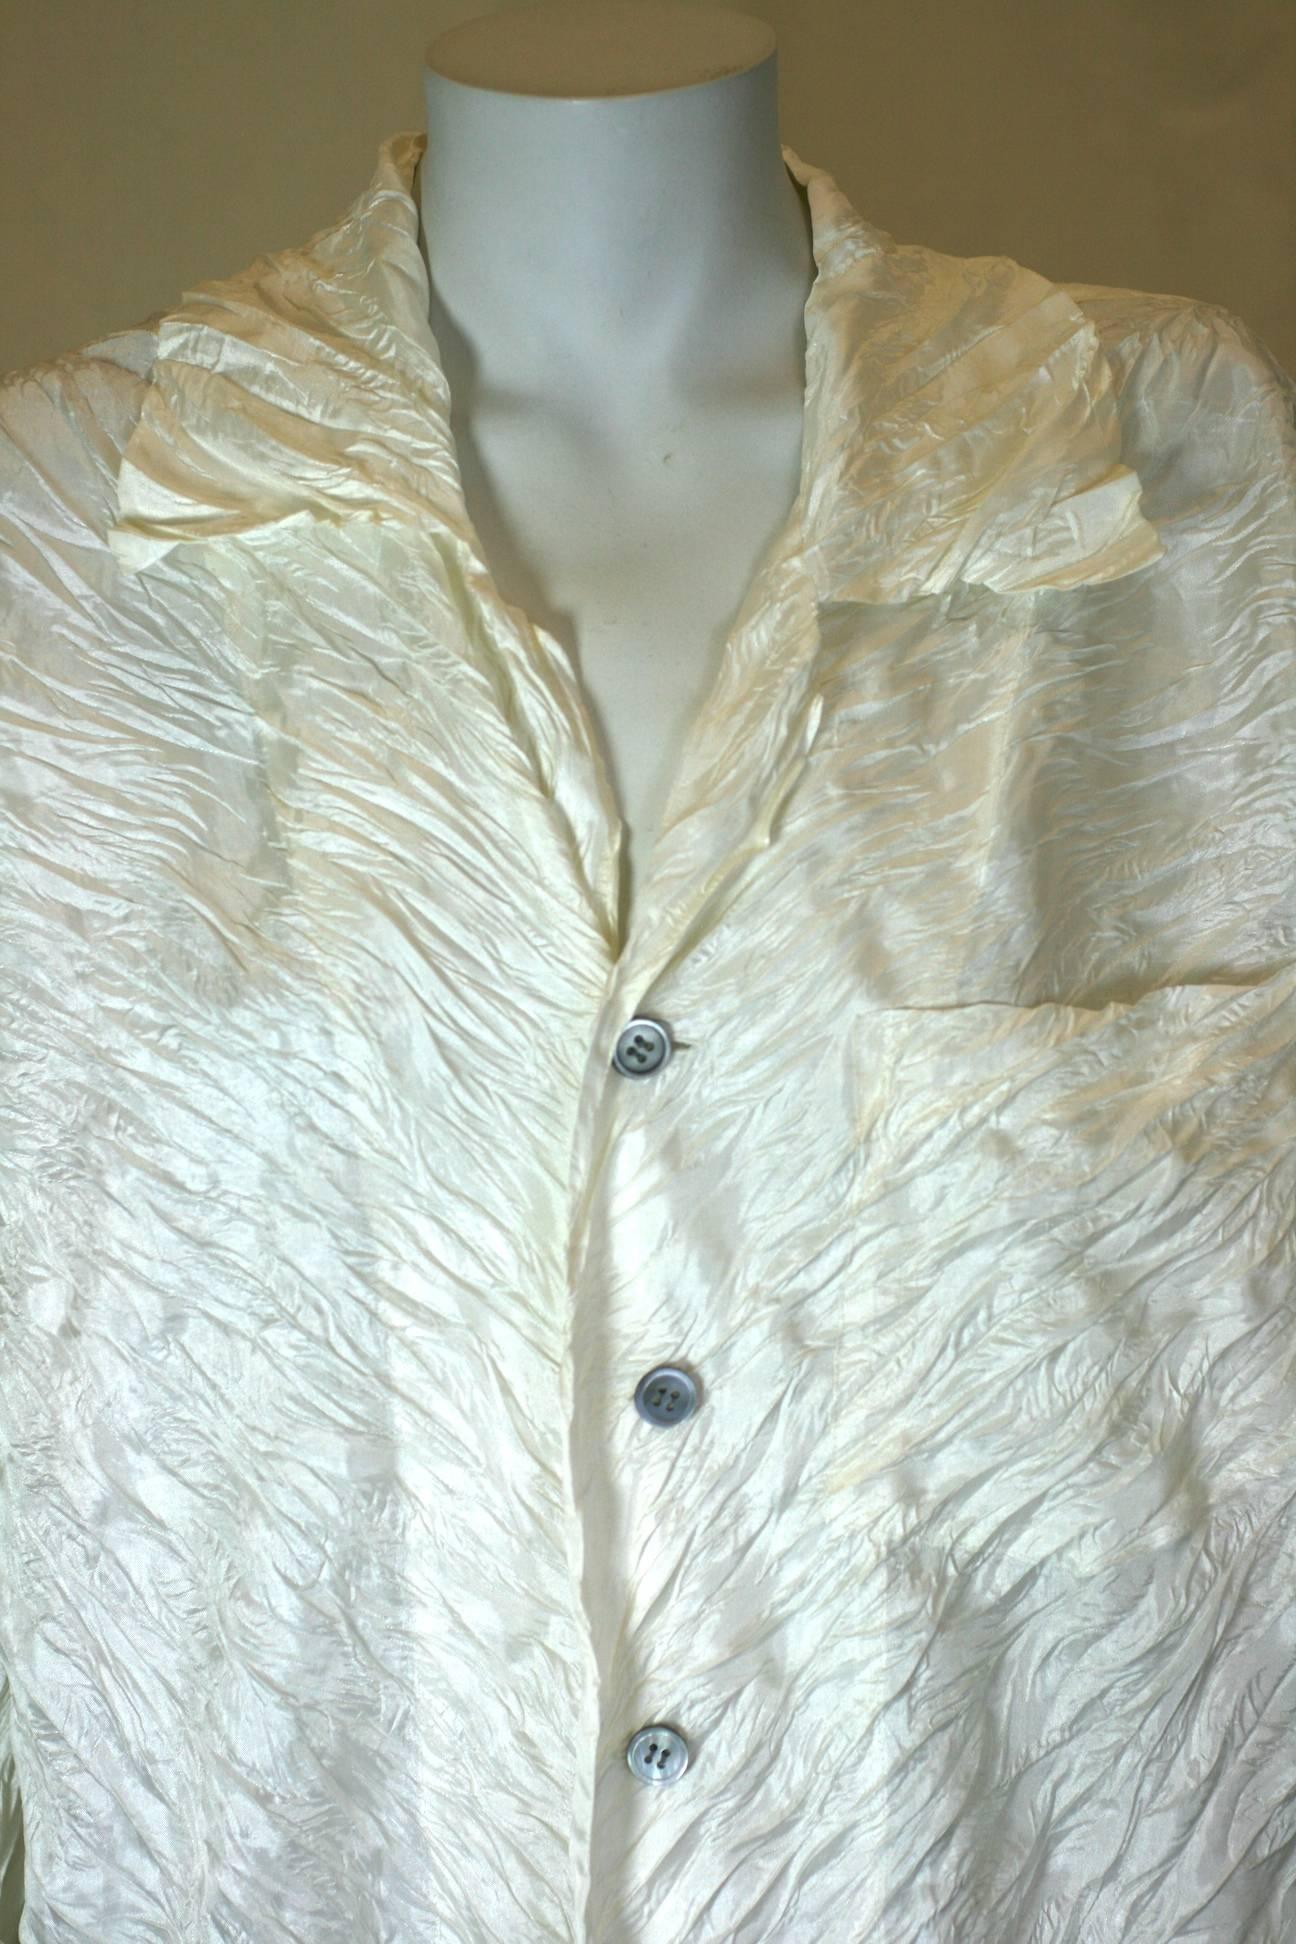 Issey Miyake Bias Crinkle Pleated Ivory Blouse. A simple mans shirt given new life with Miyake's signature pleating process. Shell buttons. Excellent Condition. 2000's Japan. Size: Small.  Unstretched measures: Length 29